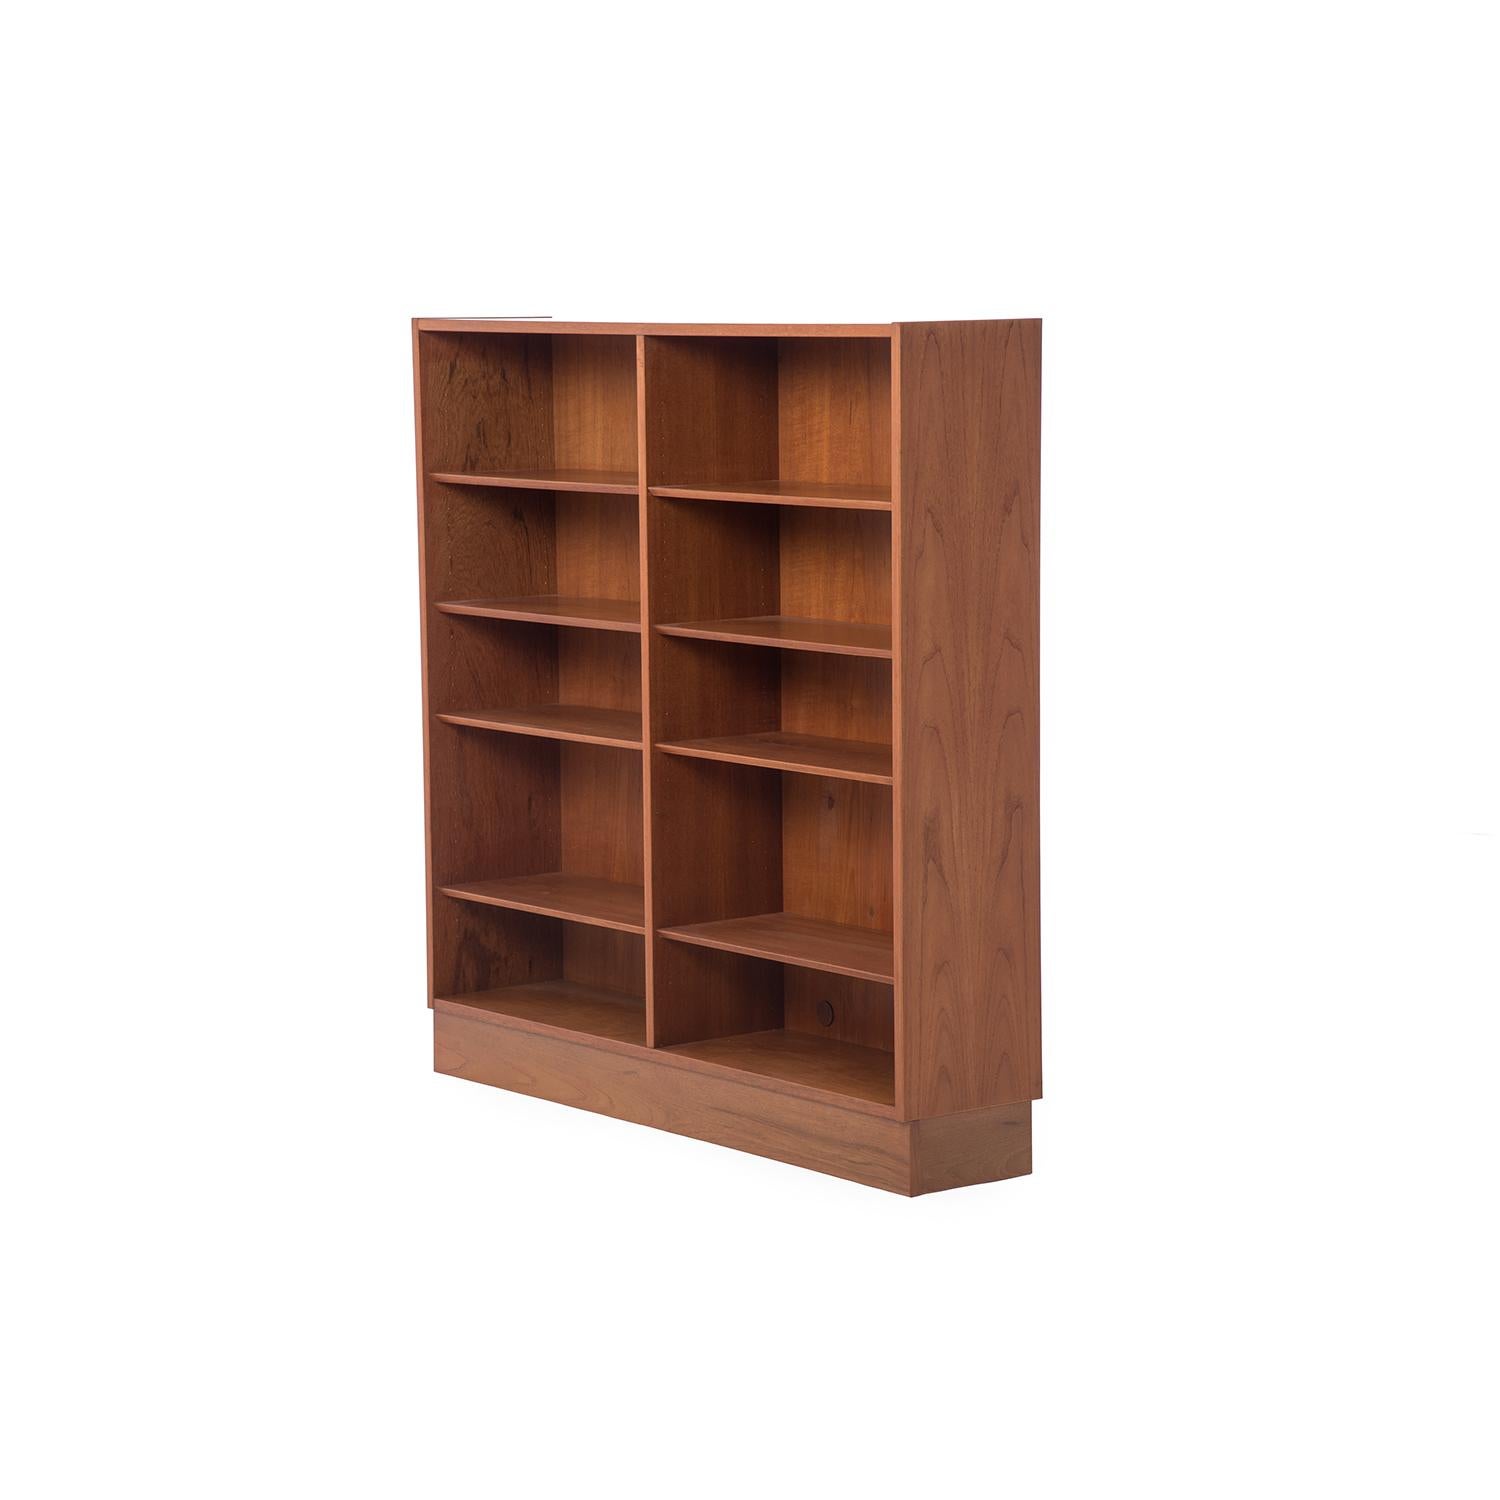 This plinth based teak bookcase features adjustable shelves in two columns. Reverse beveled shelves are adjustable, and the oil finished teak wood glows warmly like only aged and properly patinated teak can.